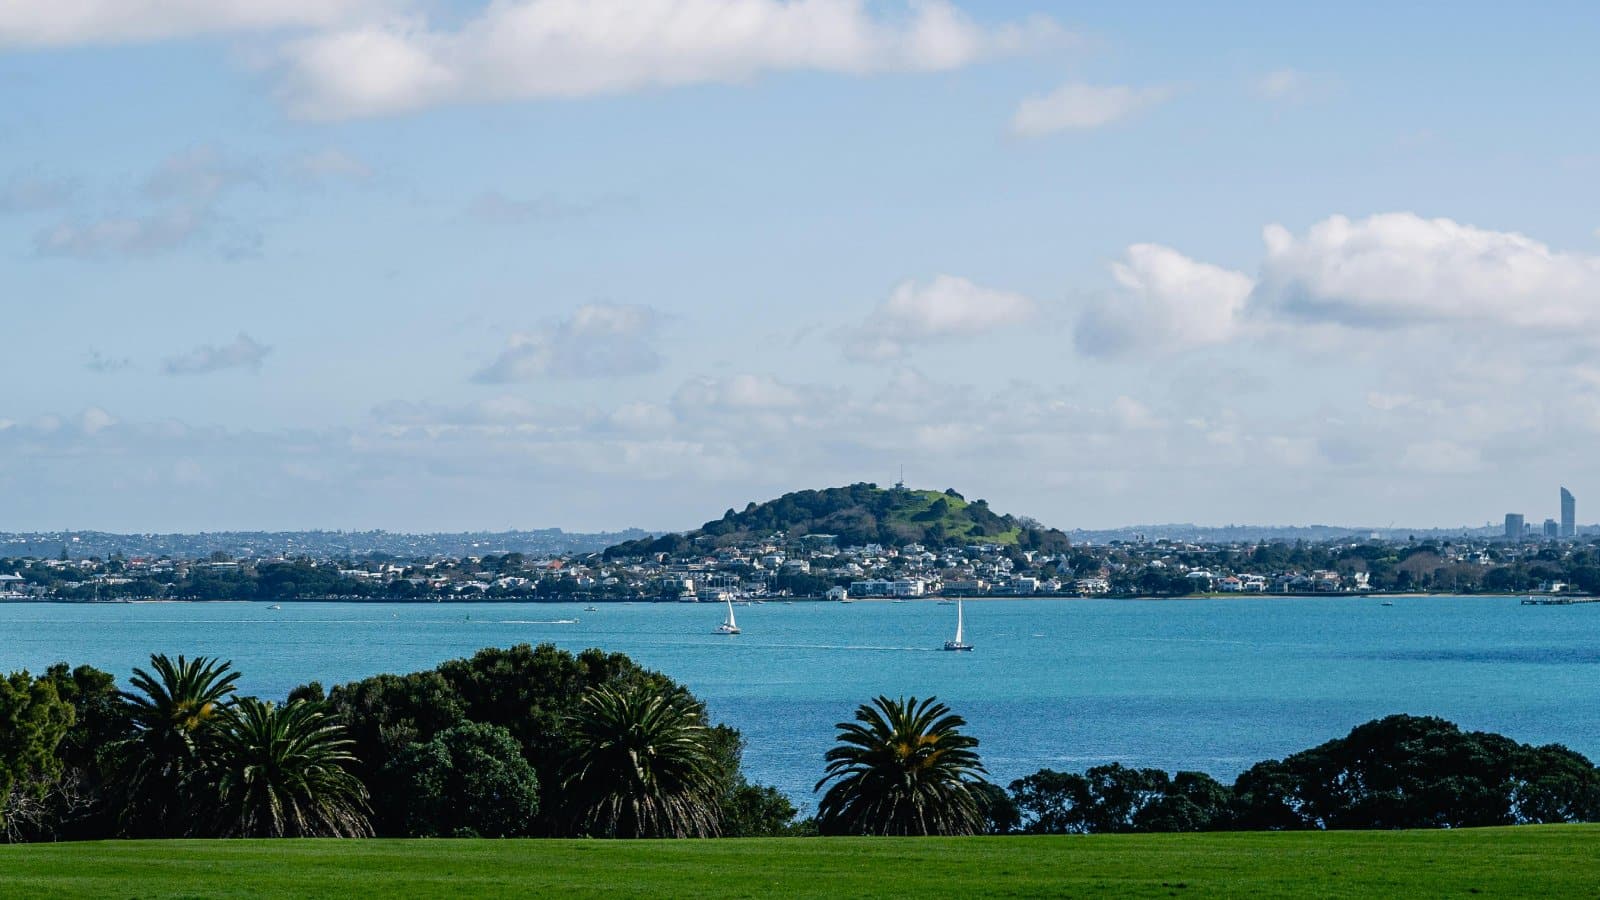 Image Credit: Pexels / Henry Han <p>Make the most of Auckland’s coastal lifestyle, with weekends spent sailing in the Hauraki Gulf, hiking in nearby rainforests, and sampling fresh seafood at waterfront restaurants. Explore the city’s diverse neighborhoods, from the trendy cafes of Ponsonby to the cultural attractions of the Auckland Art Gallery and Museum.</p>